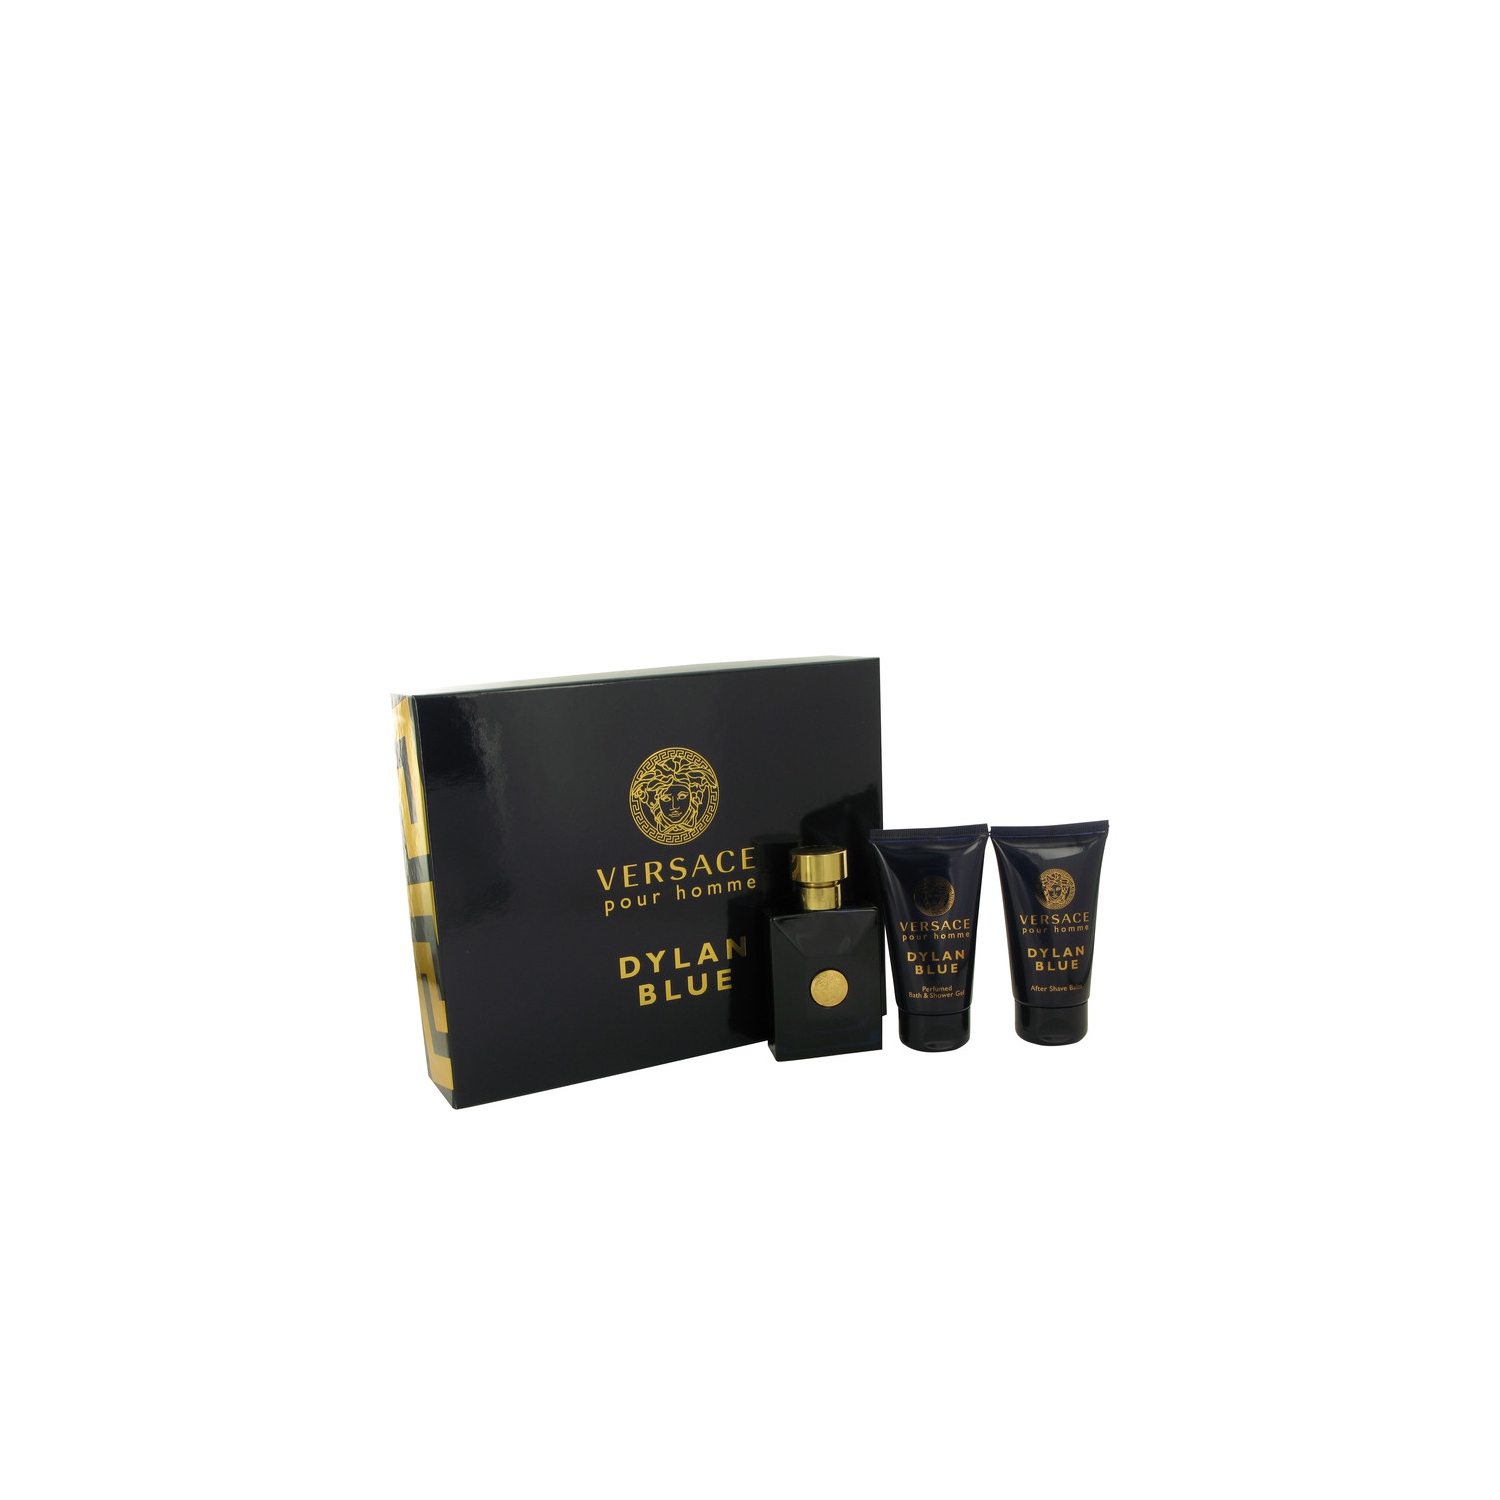 Dylan Blue by Versace for Men - 3 Pc Gift Set 1.7oz EDT Spray, 1.7oz After Shave Balm, 1.7oz Perfume